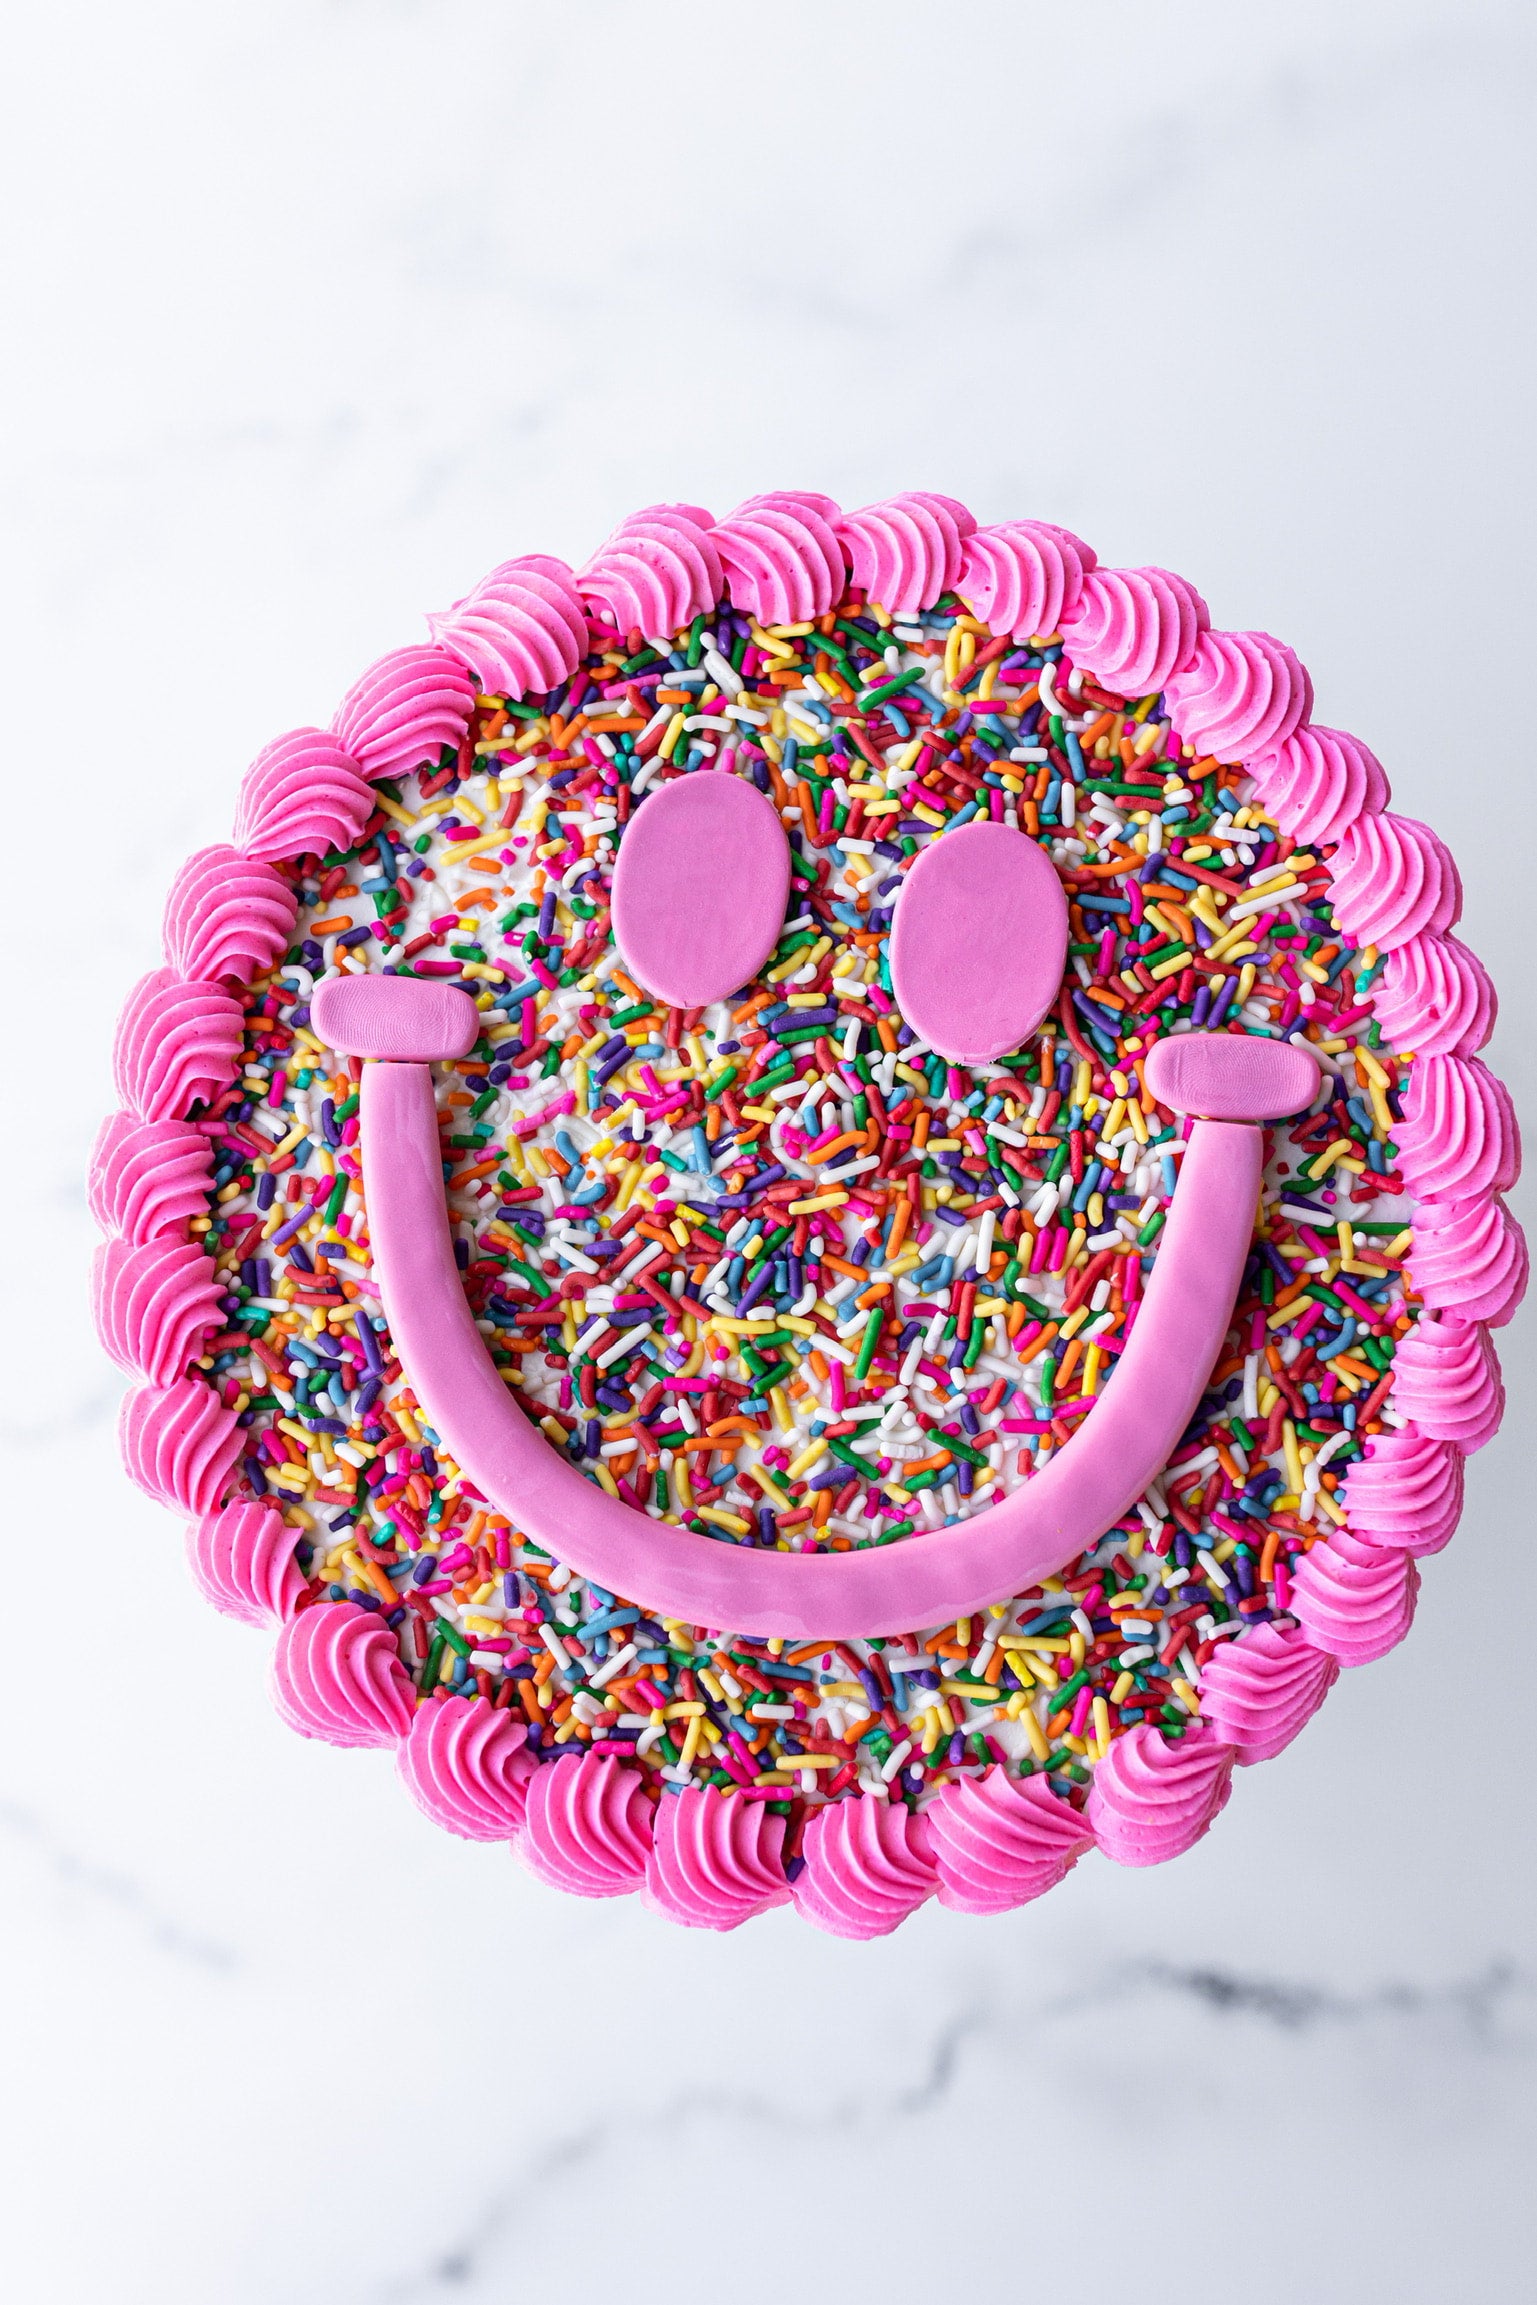 😊What makes you smile?😊 This sensational sprinkle covered smiley cake  definitely made some sweet memories for the birthday girl! . ❤️WE'RE… |  Instagram